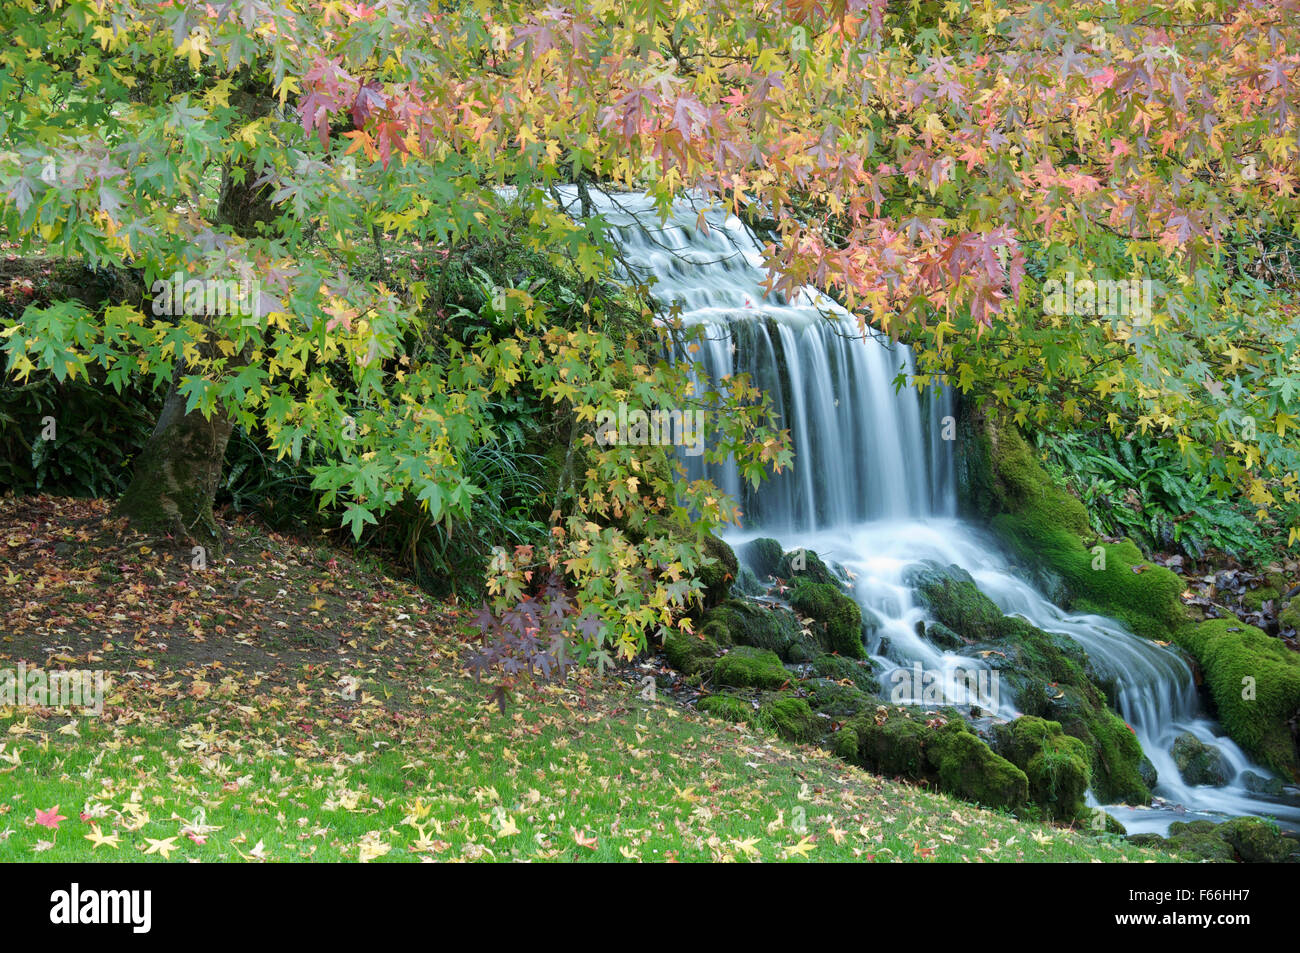 Autumn leaves overhang a picturesque waterfall flowing from Bridehead Lake, the source of the River Bride at Littlebredy. Dorset, England, UK. Stock Photo